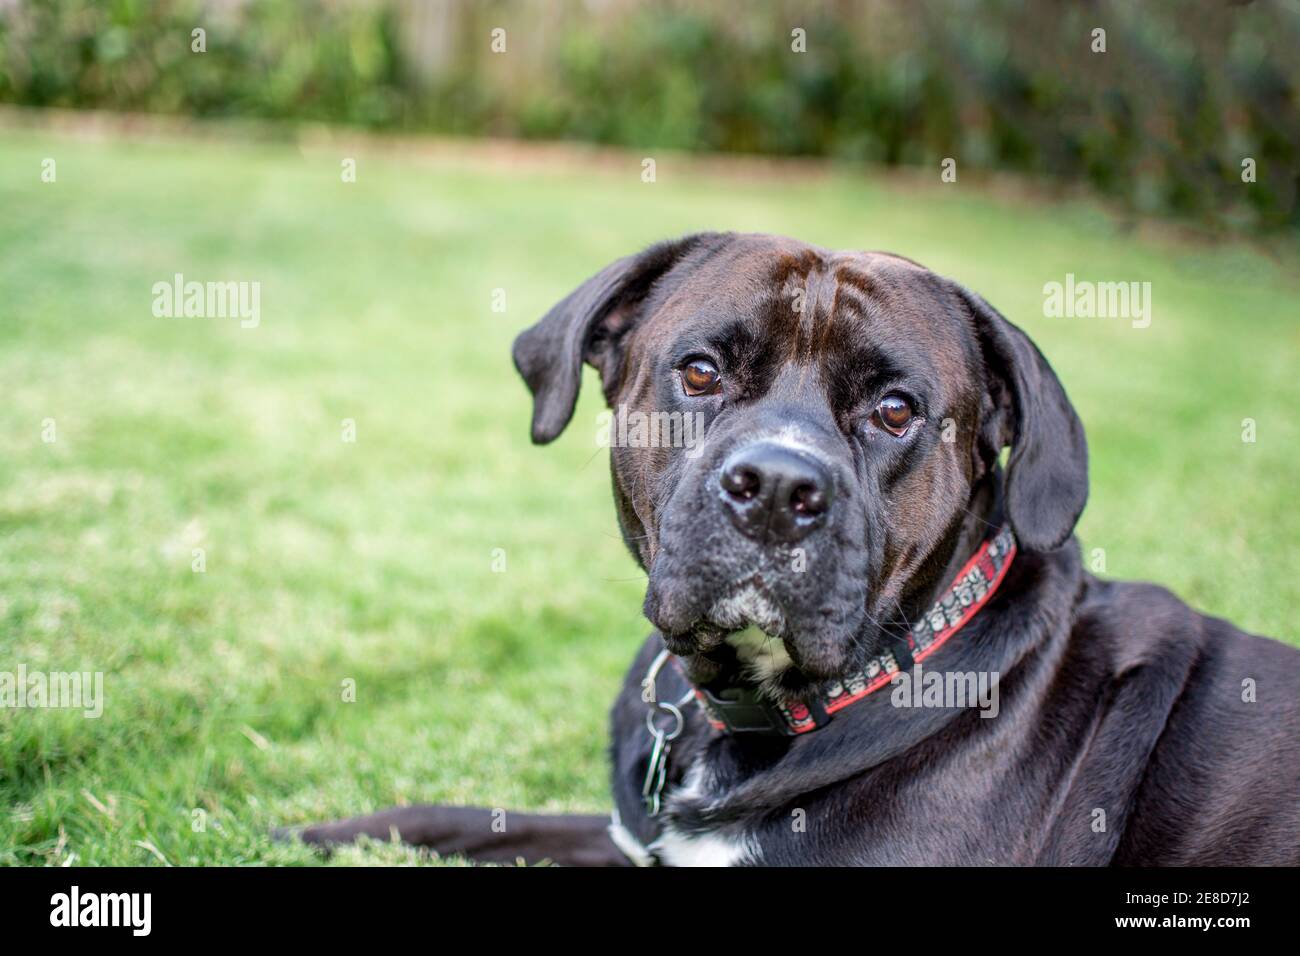 Black dog laying in the grass looking directly at the camera Stock Photo